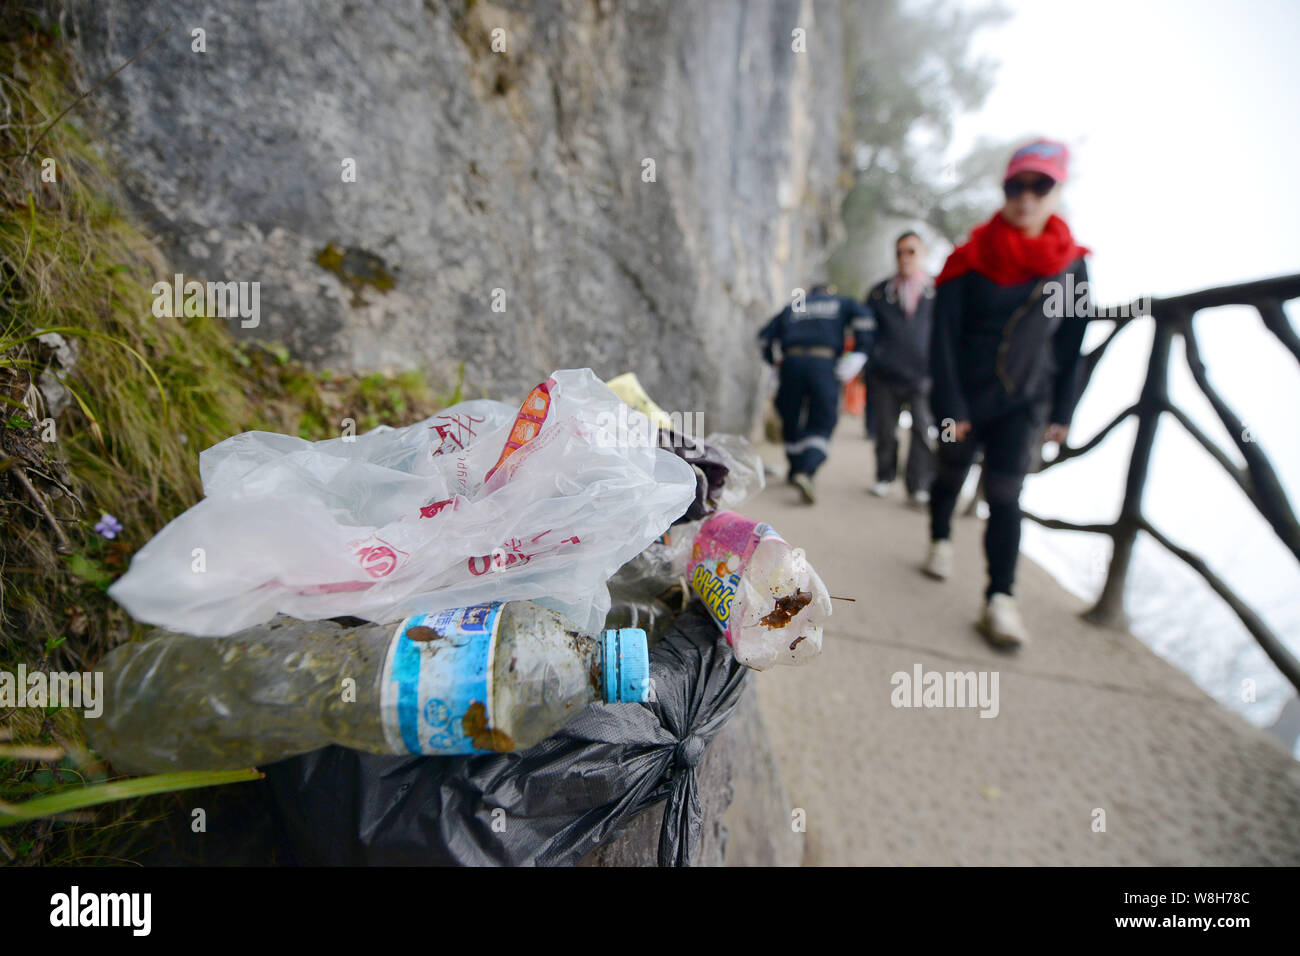 Chinese tourists walk past a garbage bin full of the litter collected by cleaning workers on the cliff of Tianmen Mountain or Mount Tianmenshan in Zha Stock Photo